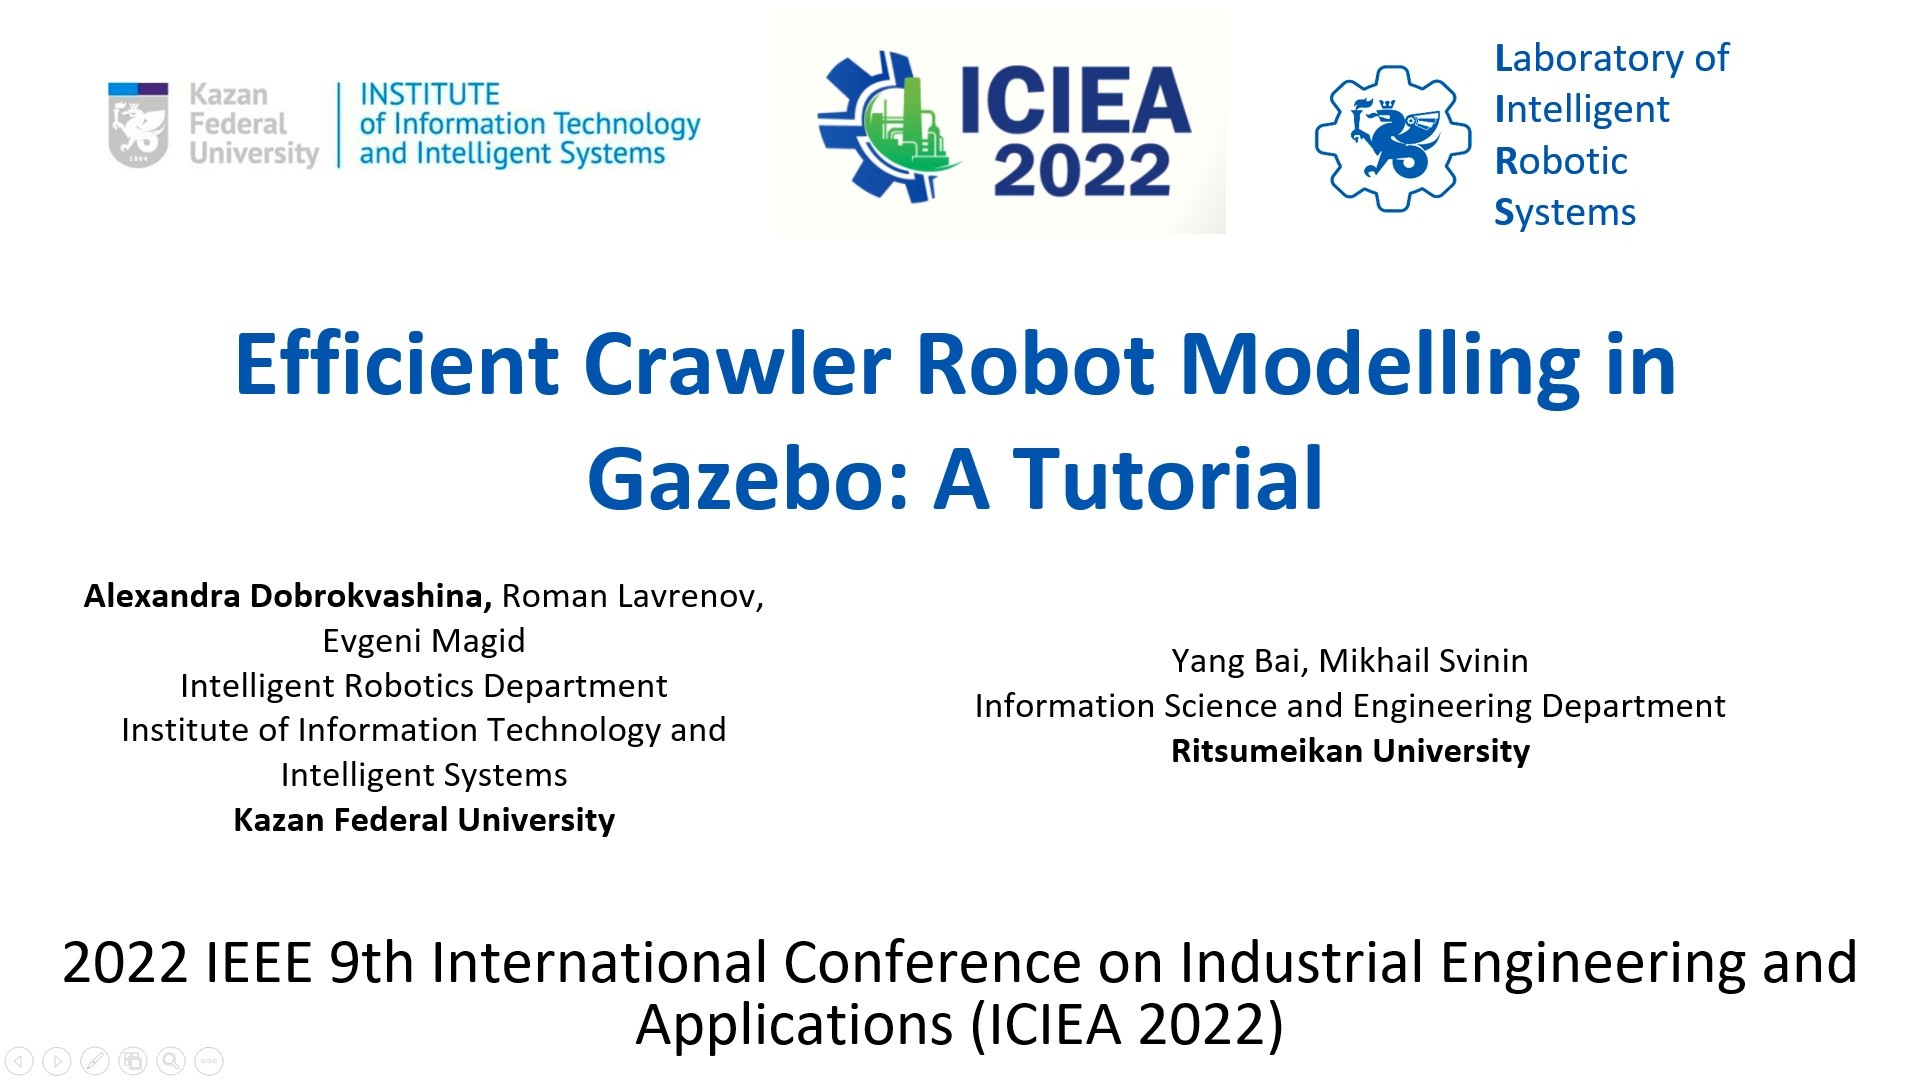 An employee of the Laboratory of Intelligent Robotic Systems presented a scientific report at the IX International Conference on Industrial Engineering and Applications